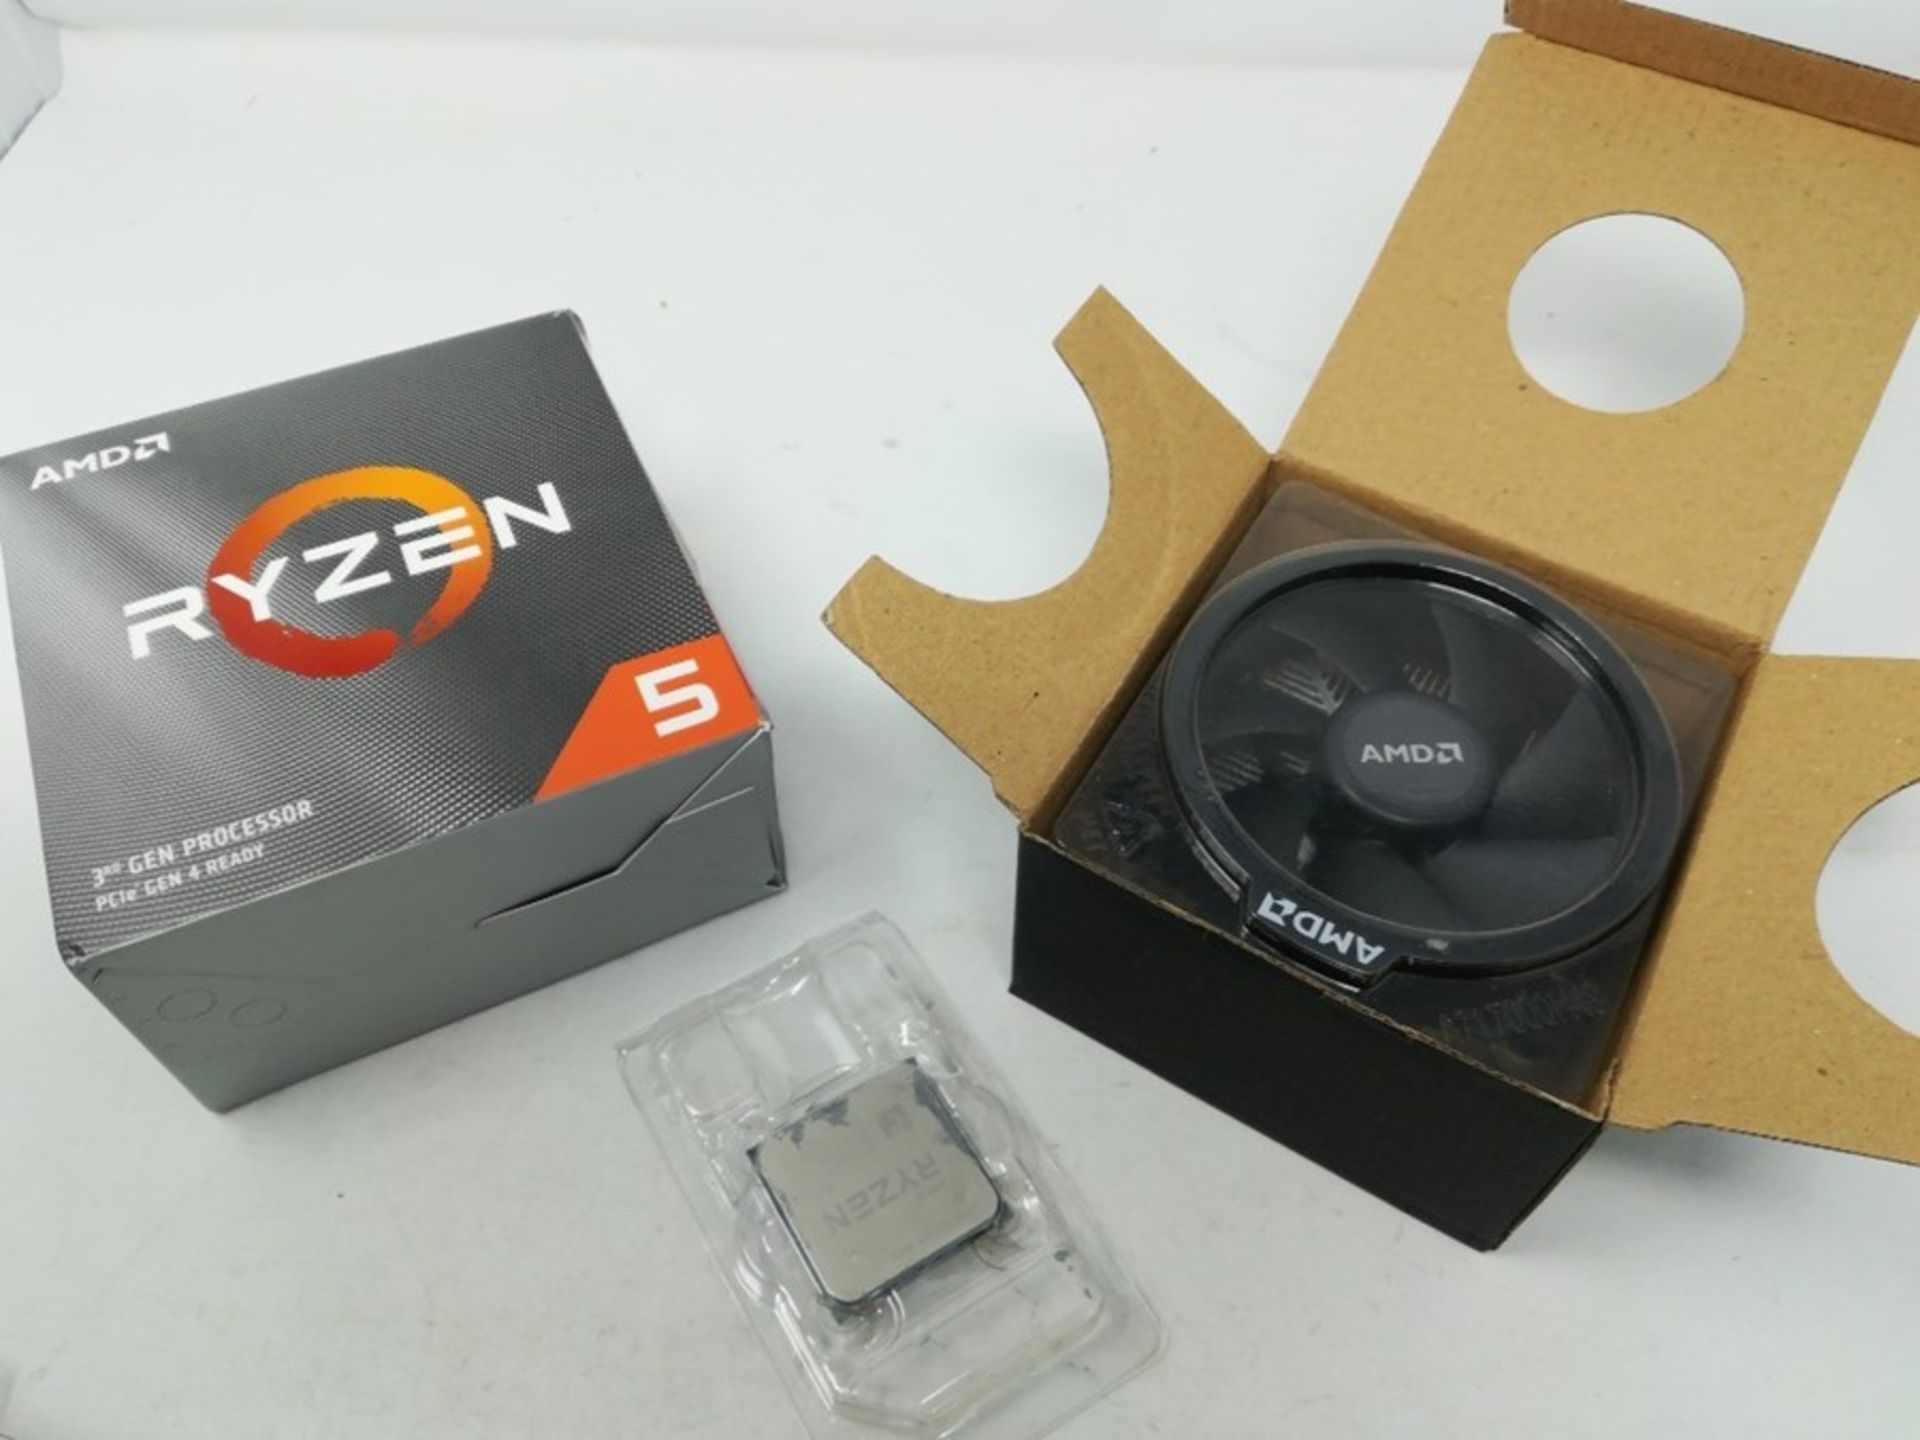 RRP £179.00 AMD Ryzen 5 3600 Processor (6C/12T, 35 MB Cache, 4.2 GHz Max Boost) - Image 2 of 2